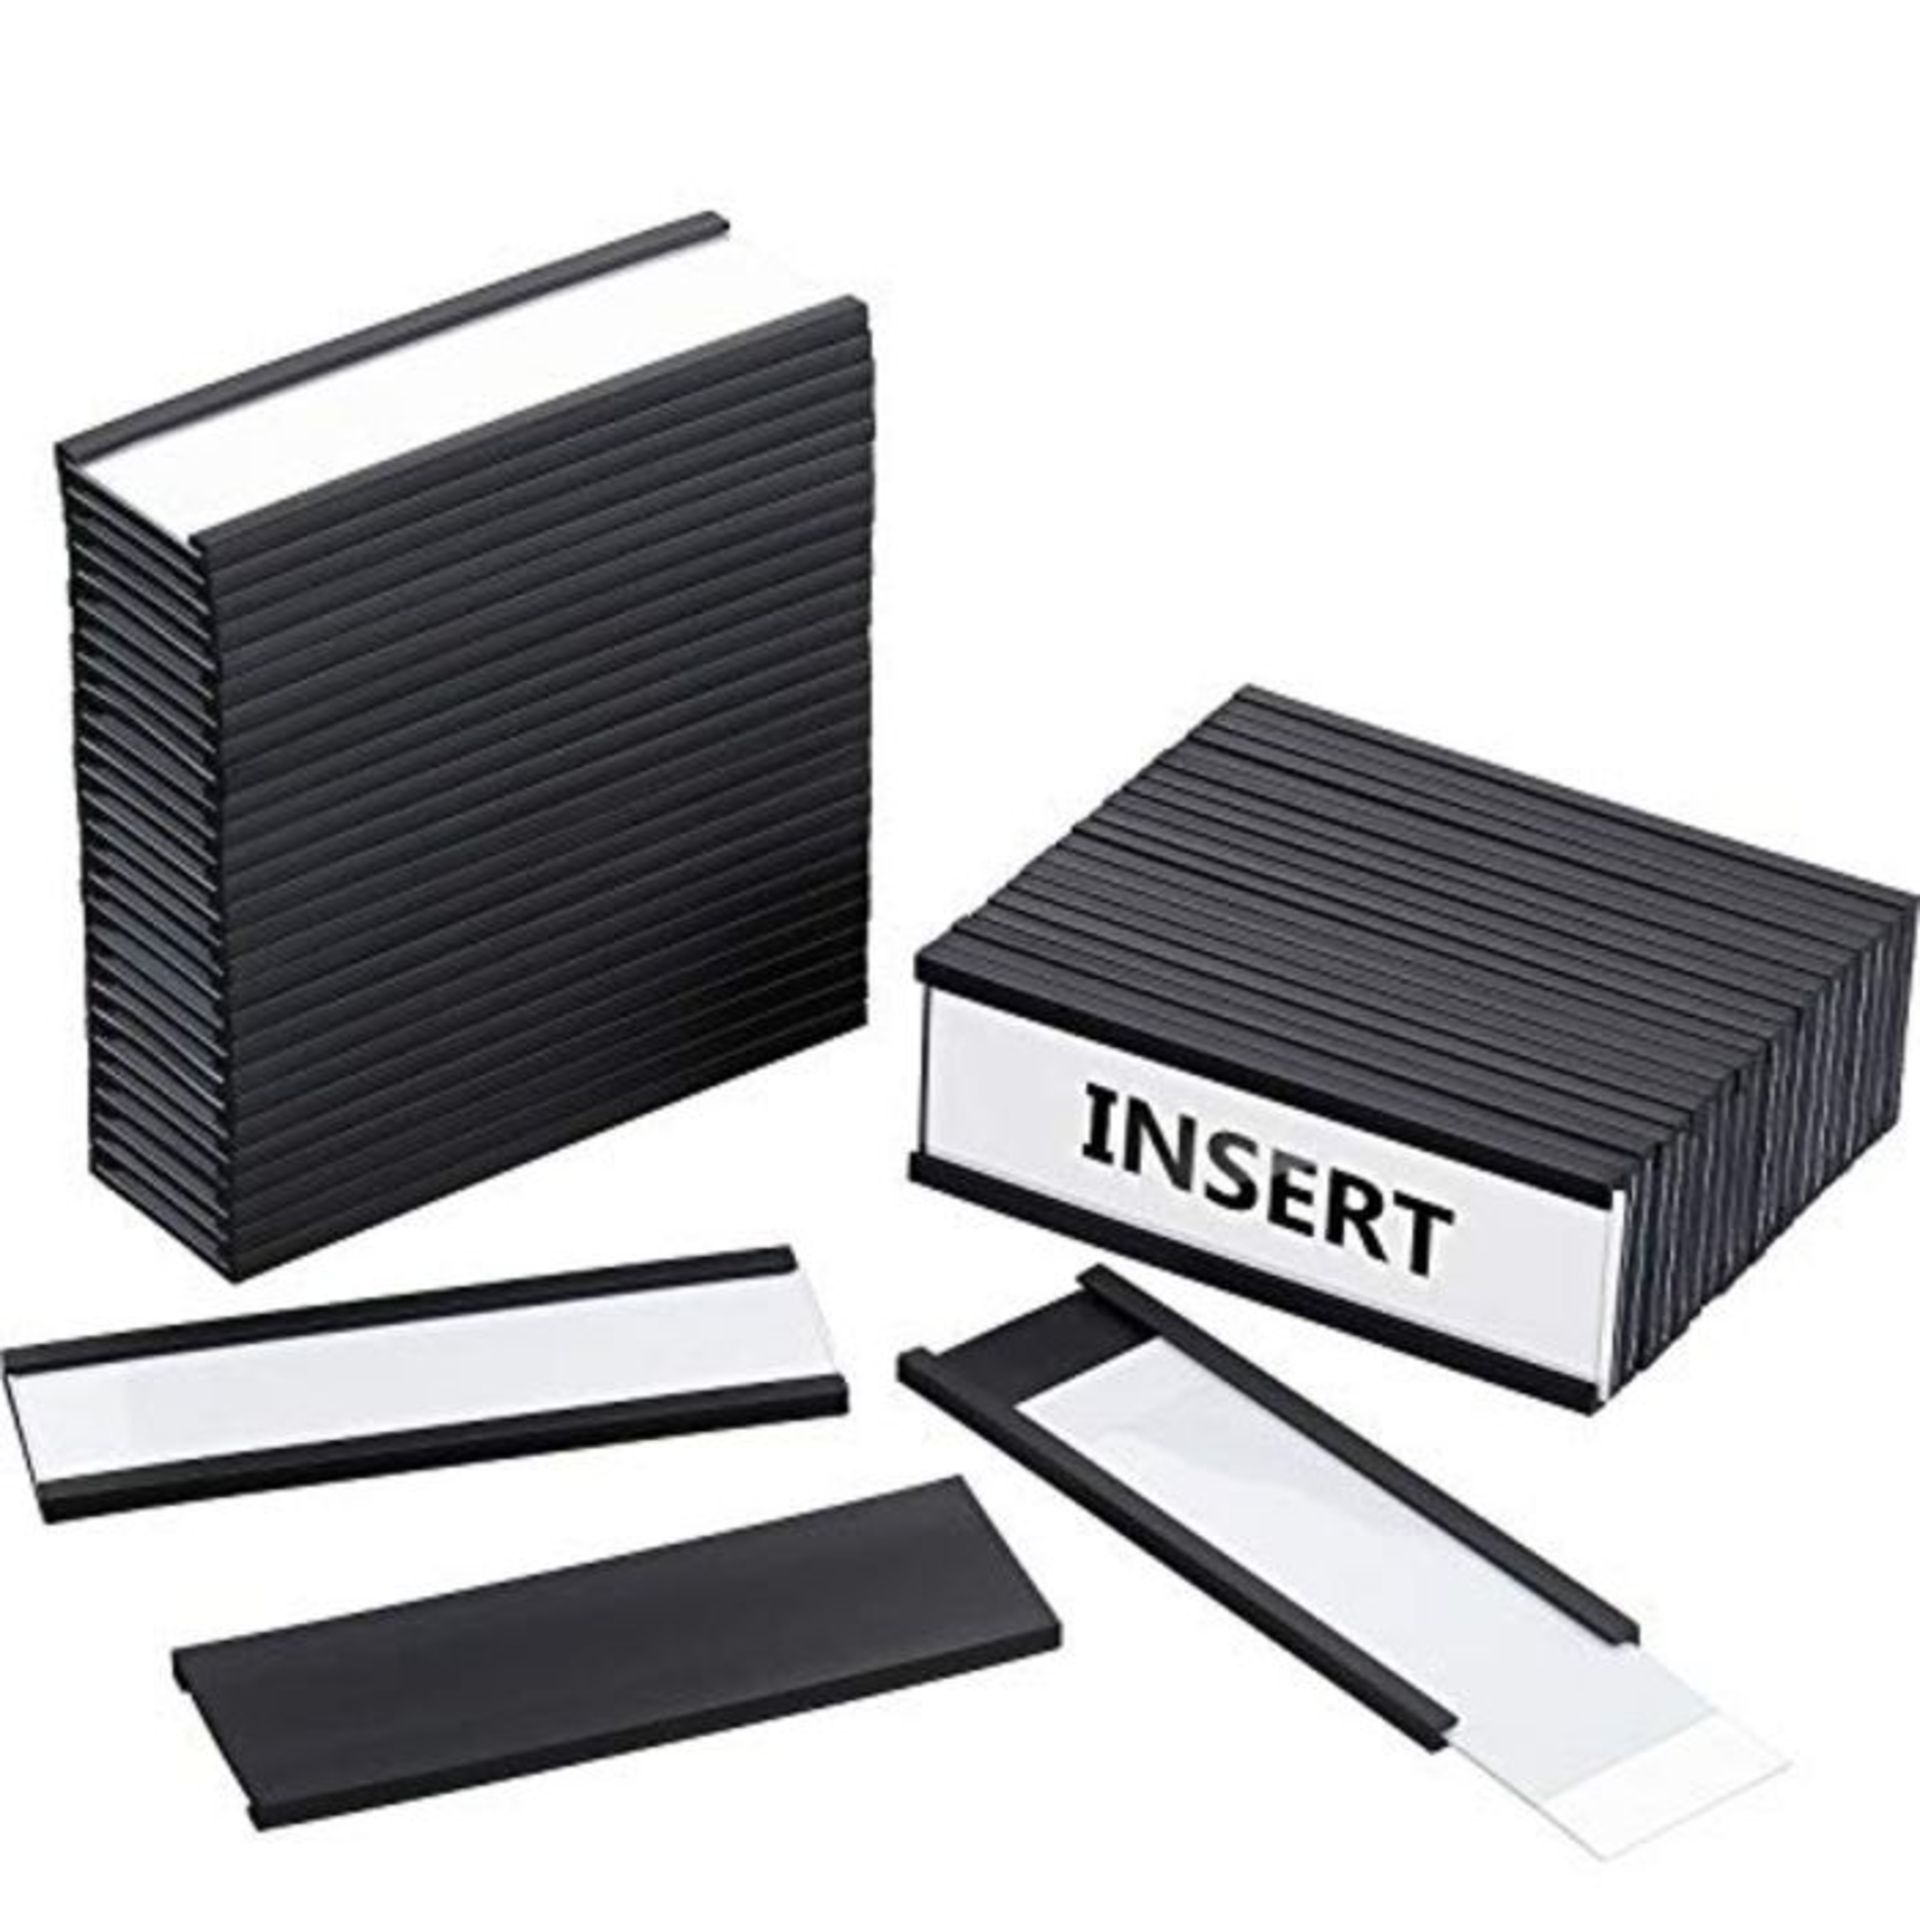 Magnetic Data Card Holders Magnetic Labels with Magnets and Cards for Metal Shelving,